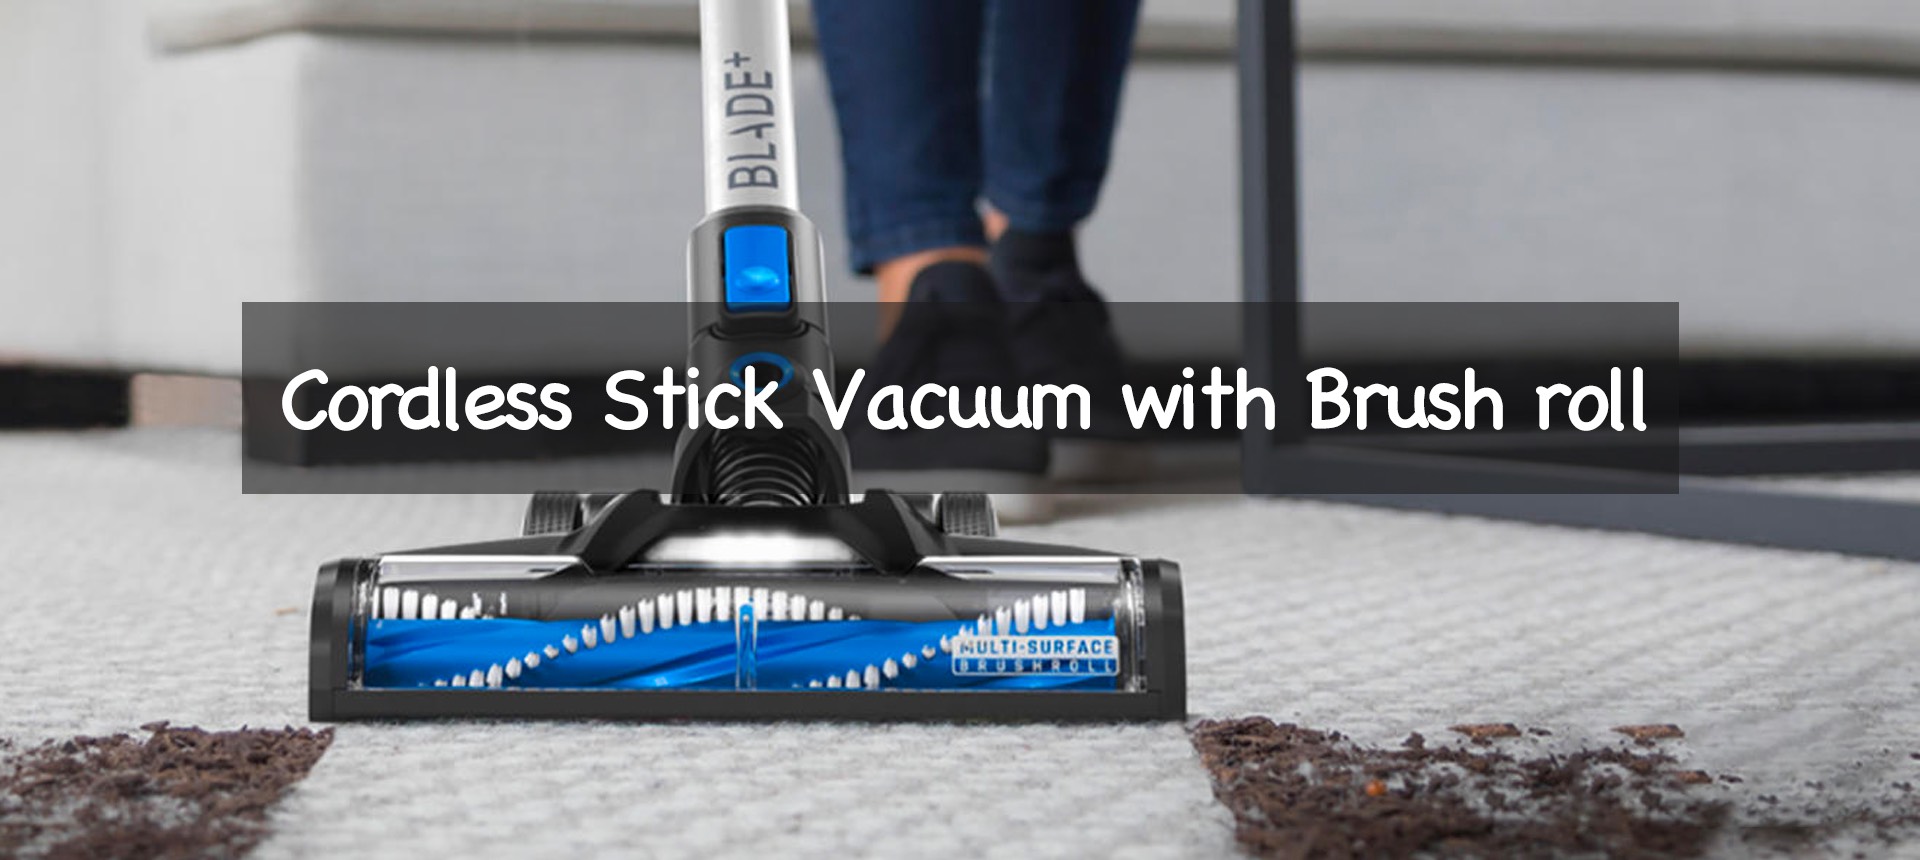 Cordless Stick Vacuum with Brush roll